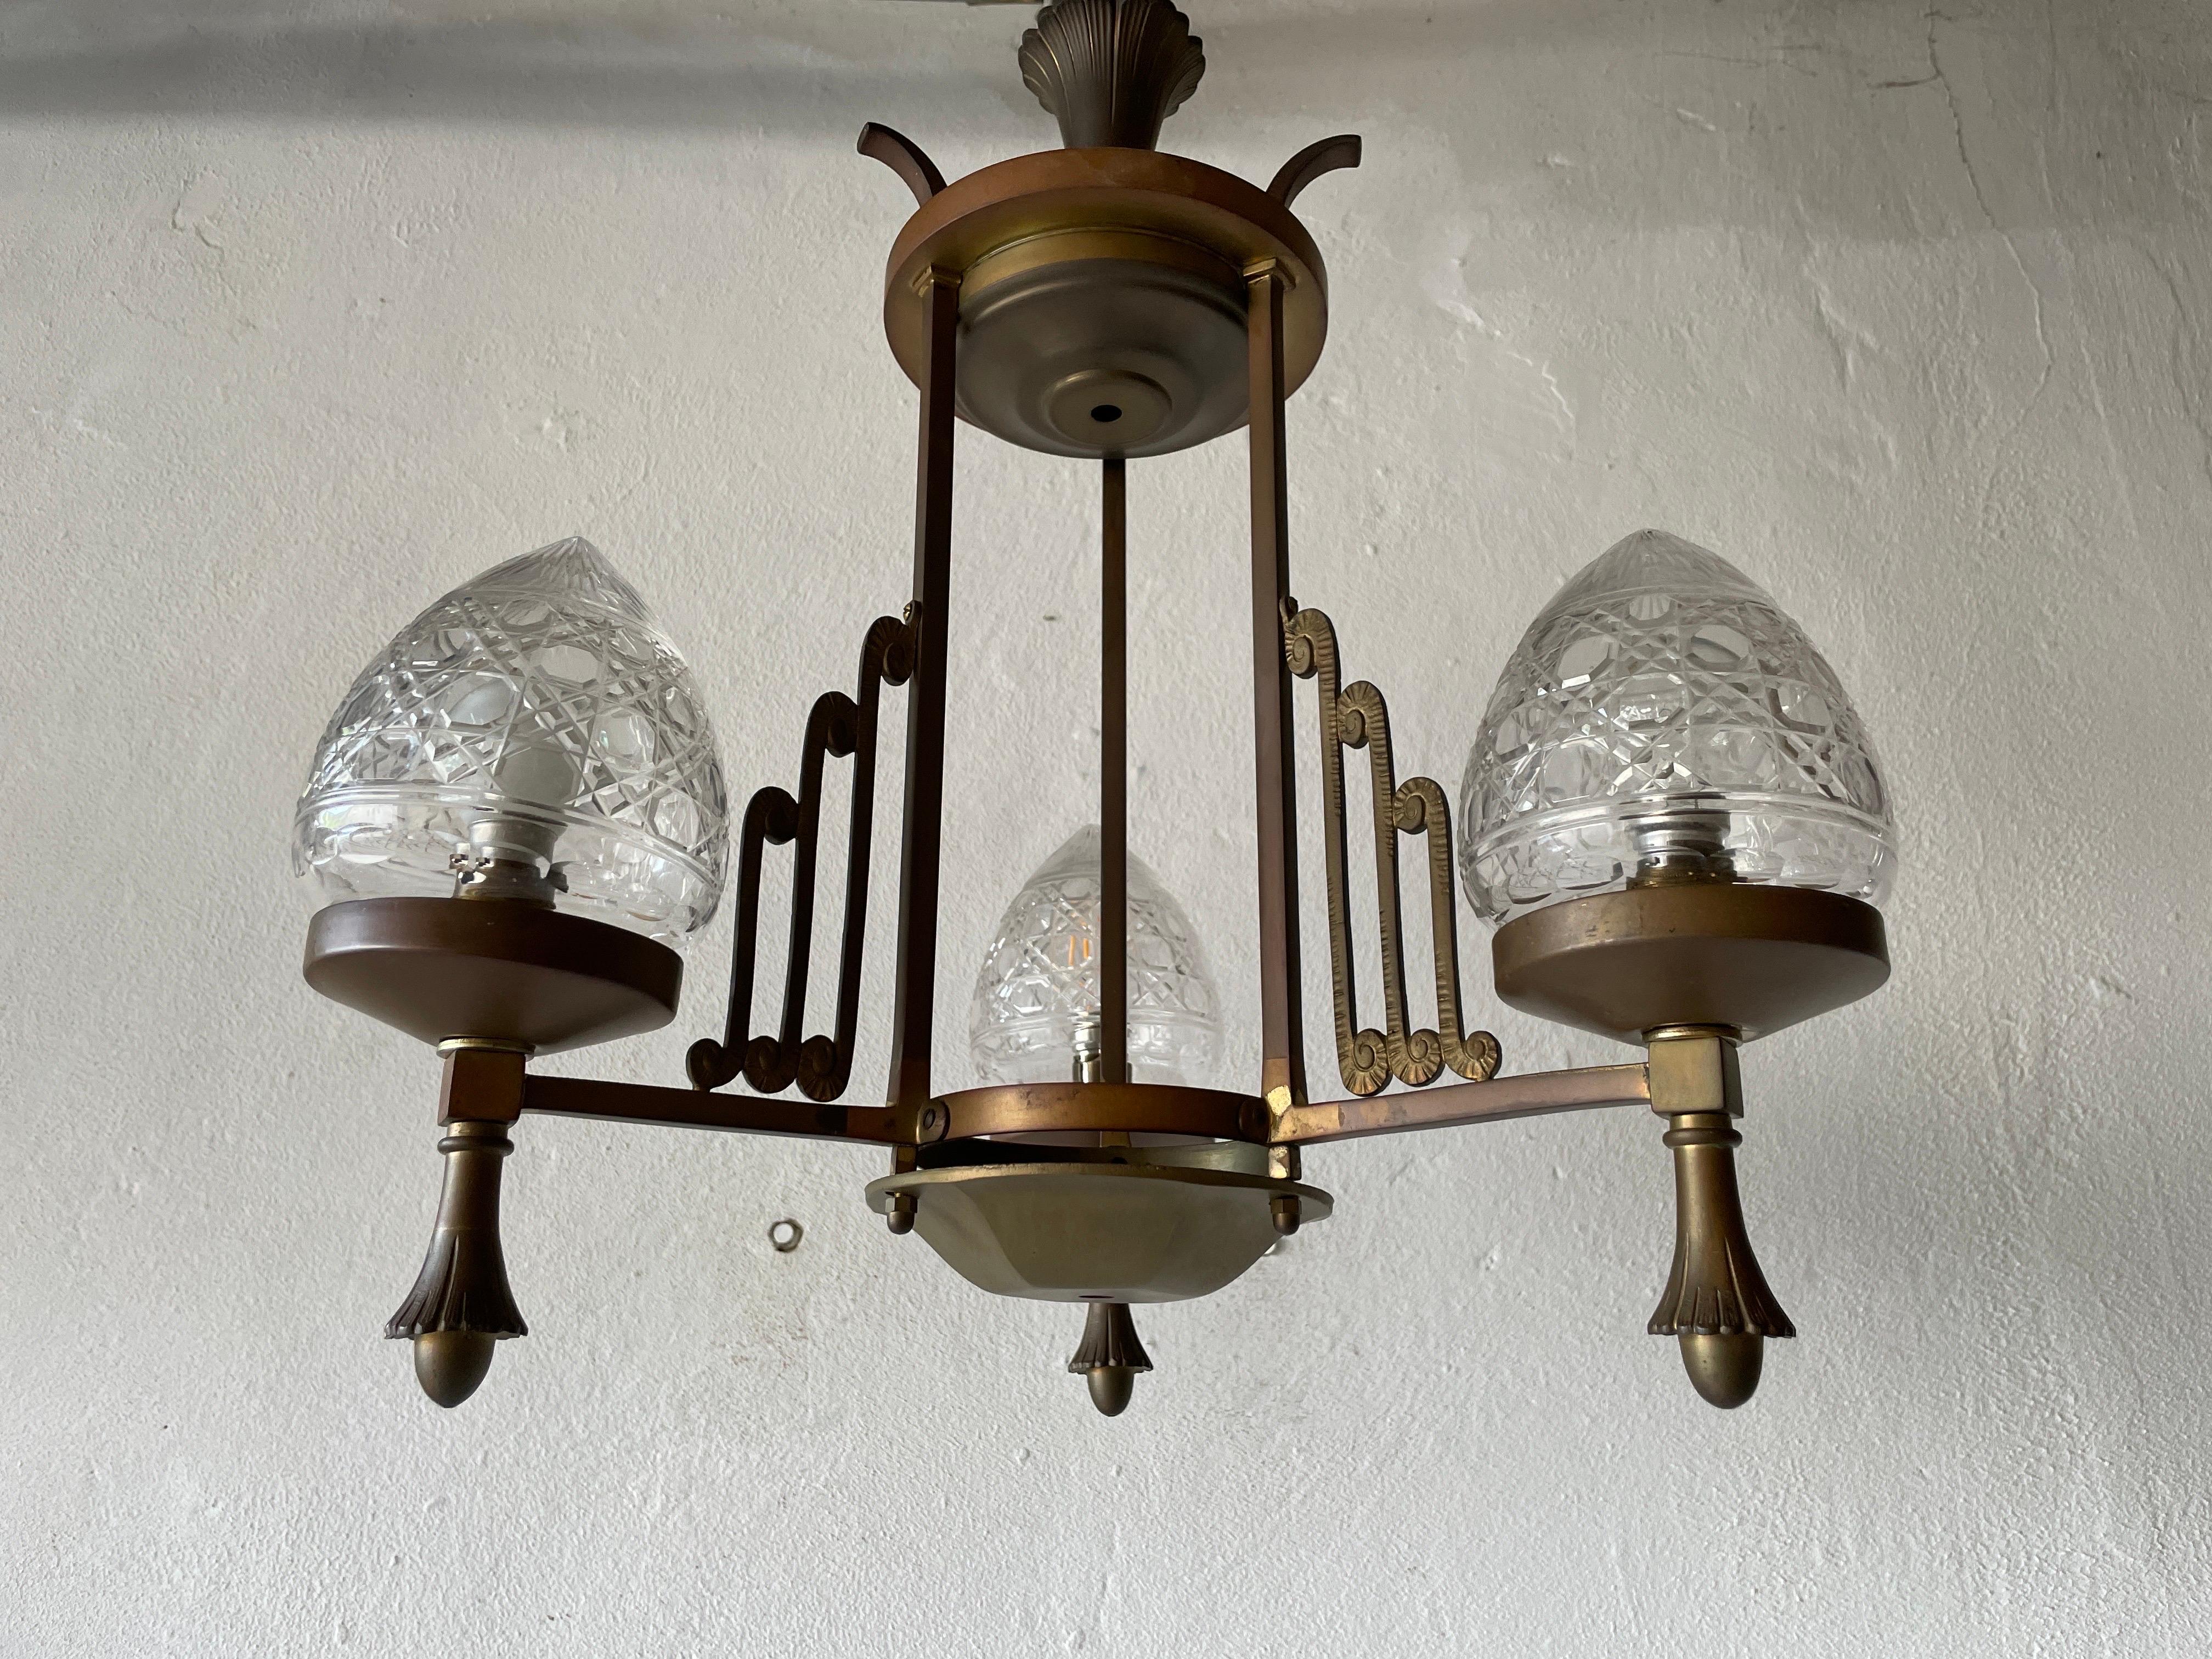 Unique French Copper Architectural Body Chandelier, 1940s, France For Sale 1